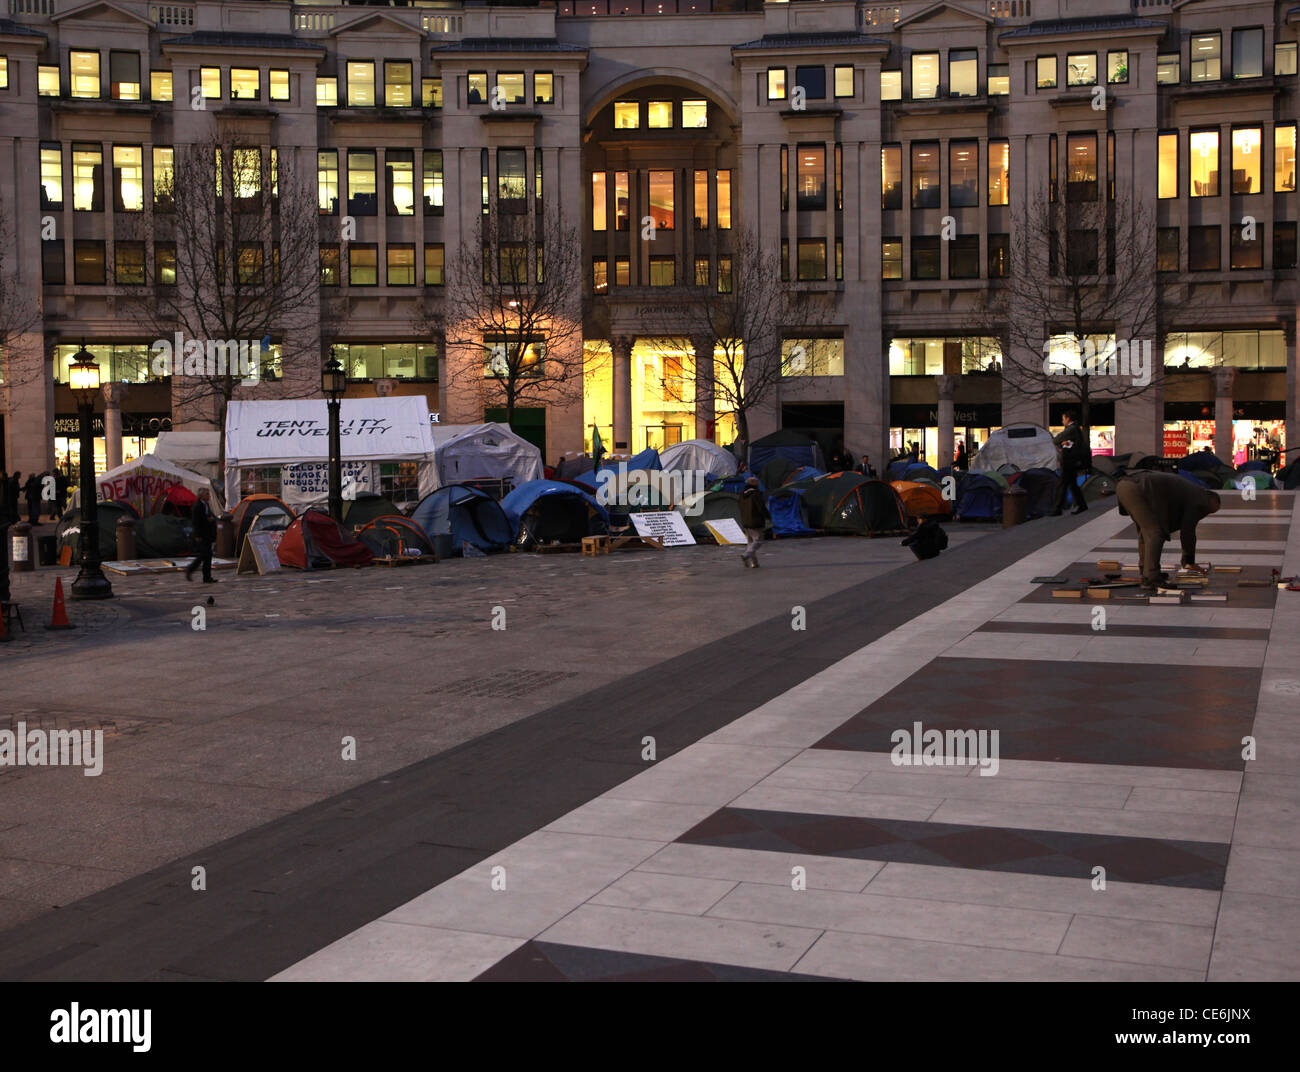 Tent City Protest Camp outside St Paul's, London in the evening Stock Photo